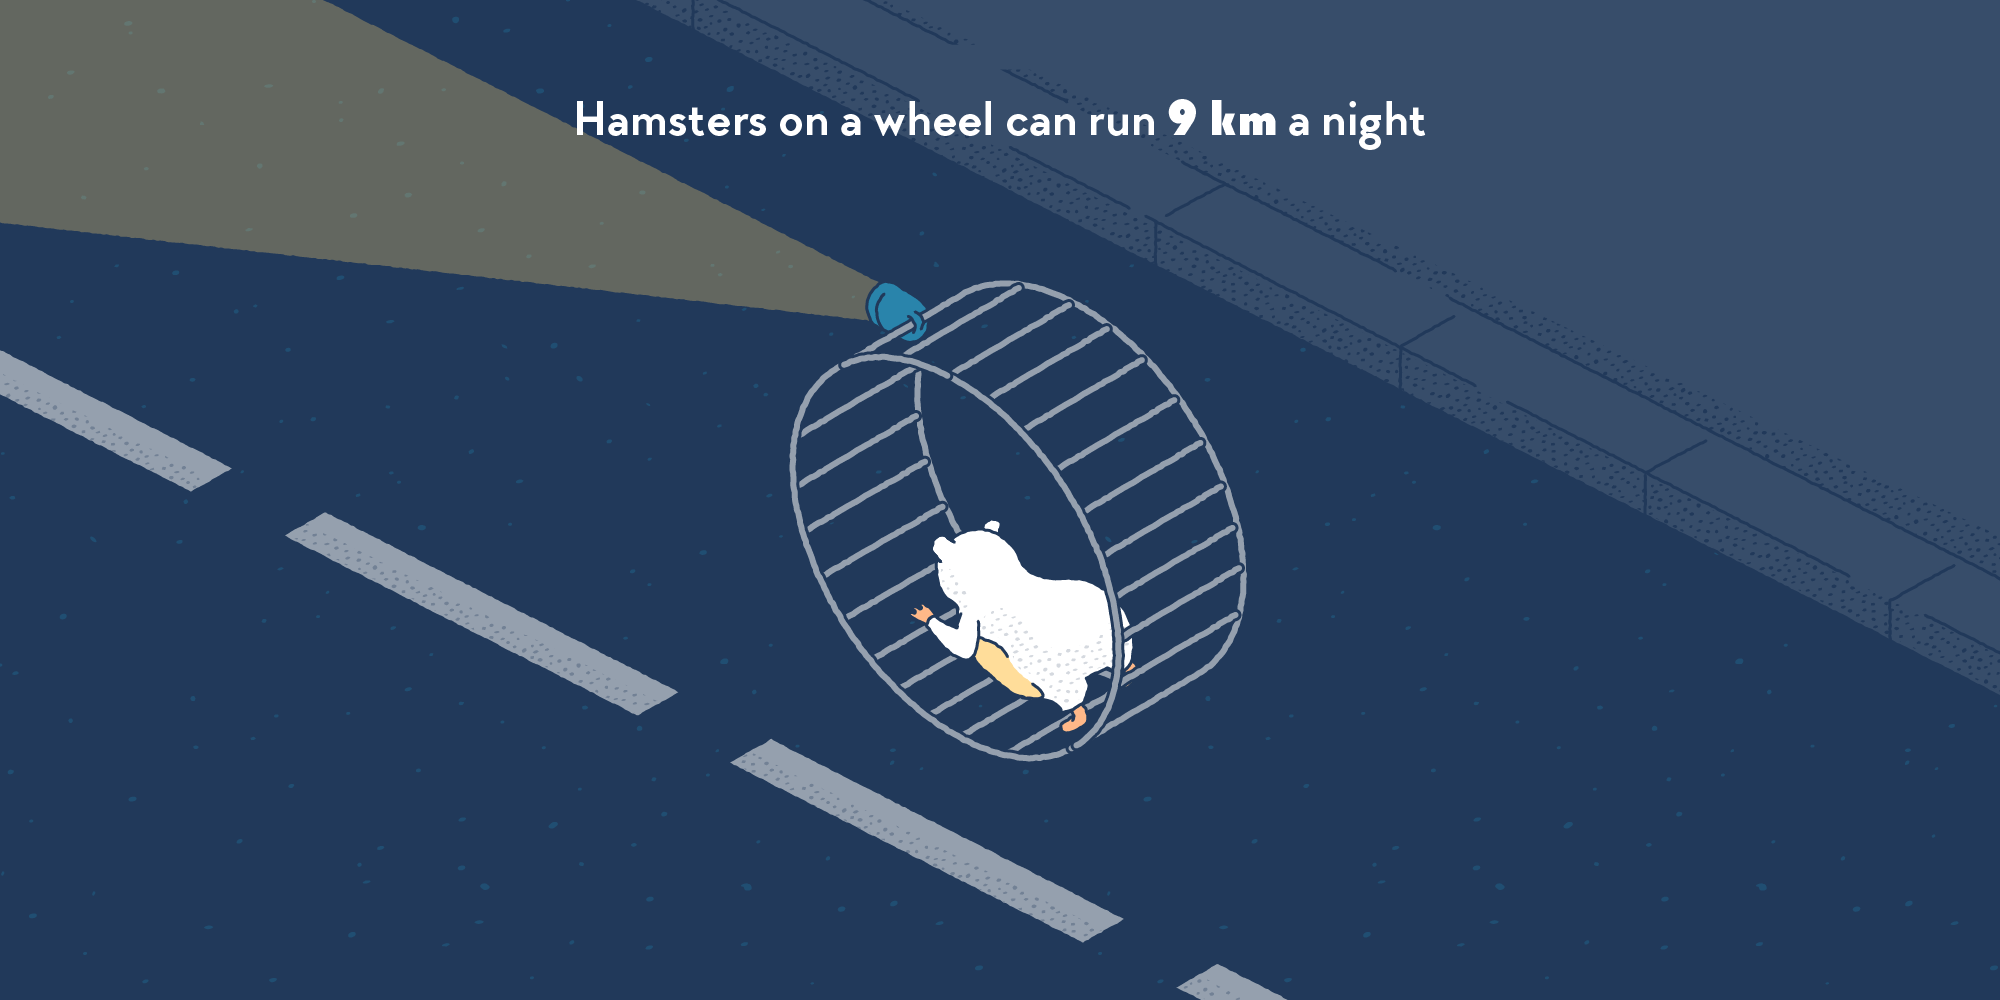 An hamster running in a loose wheel on the road at night.